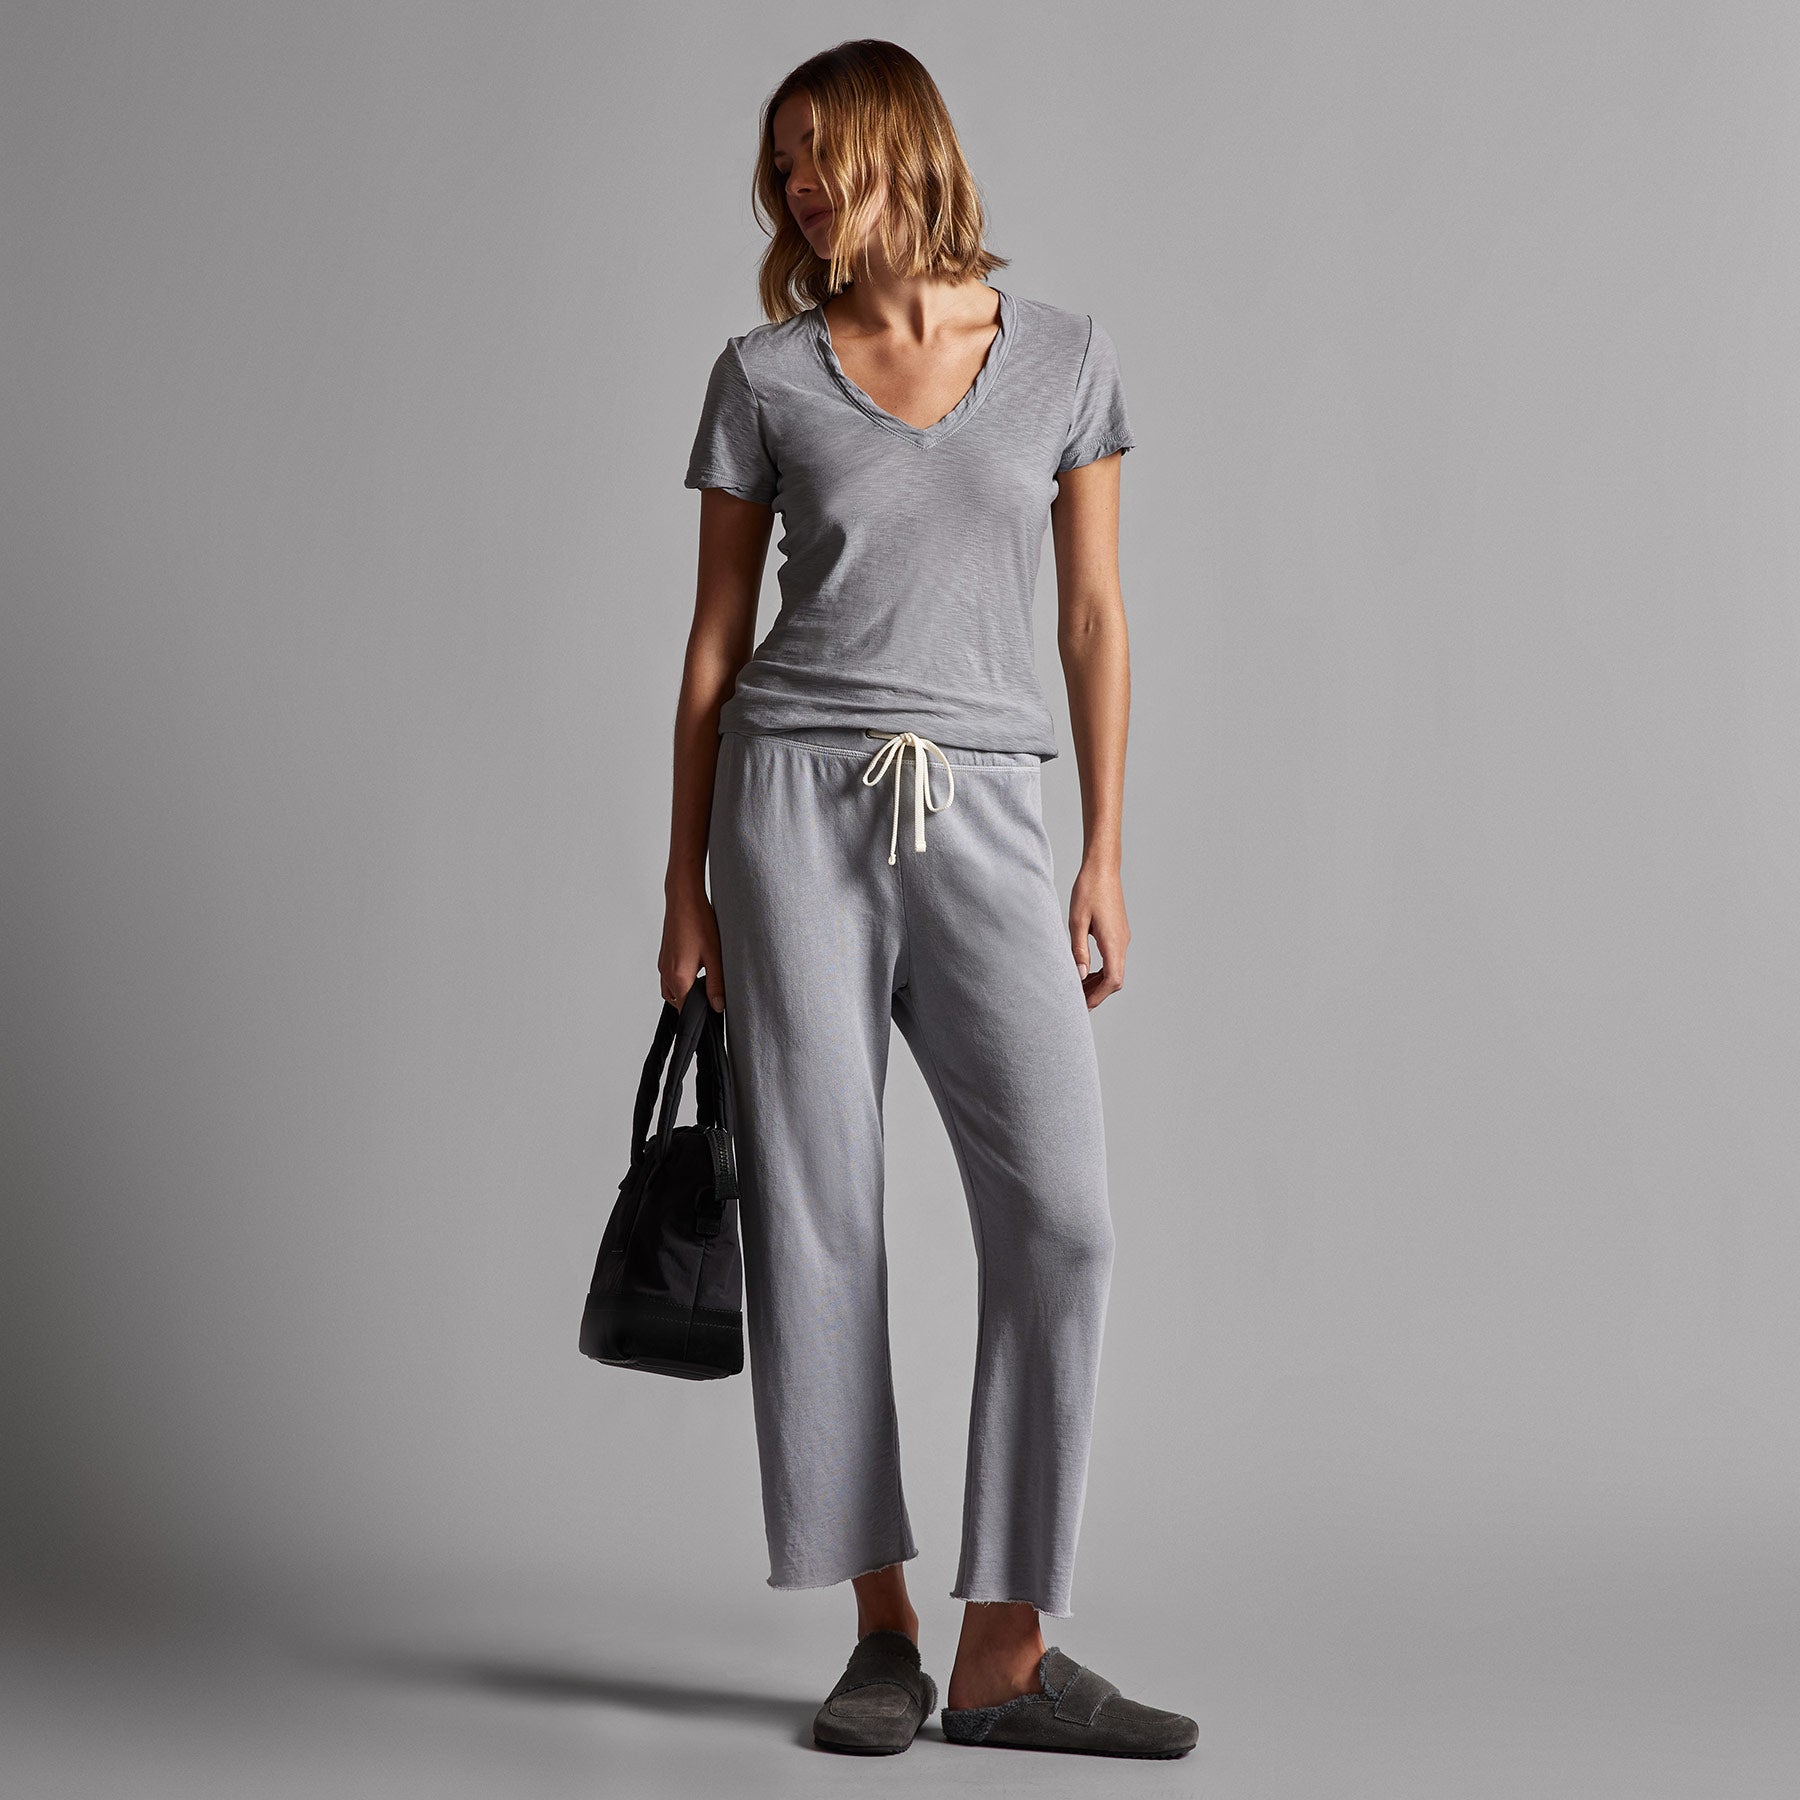 Los | Pigment James Vintage Angeles Perse Terry Cutoff - French Sweatpant Goji